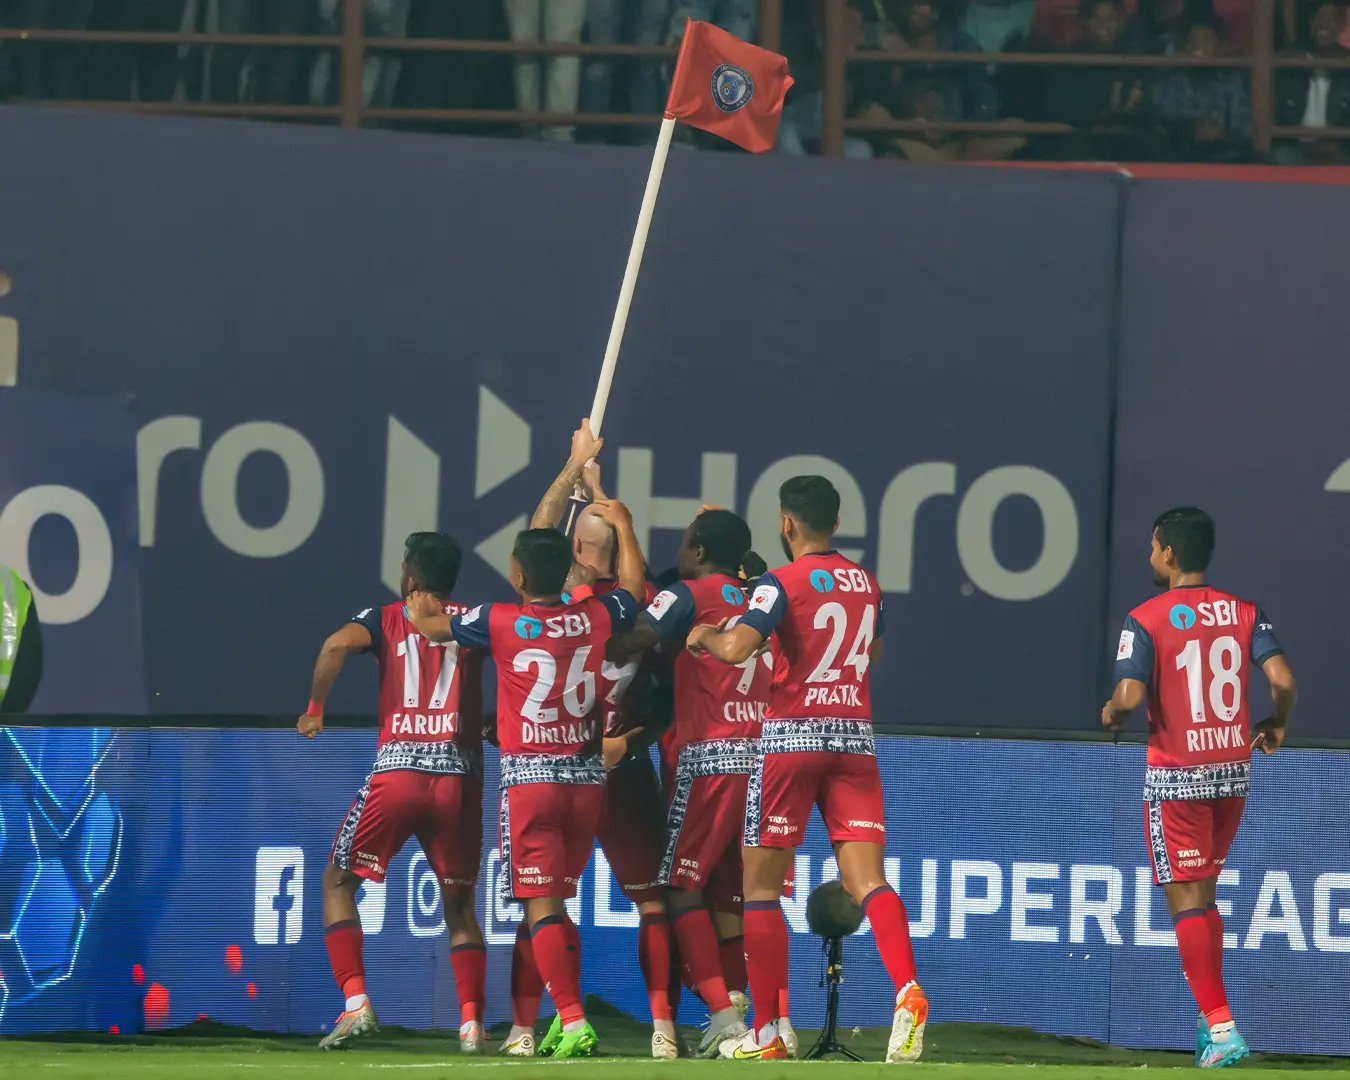 JFC vs HFC Live Streaming: Big Clash in ISL, Hyderabad FC SEEKS to continue GOOD run in ISL as they face Jamshedpur FC - Follow LIVE